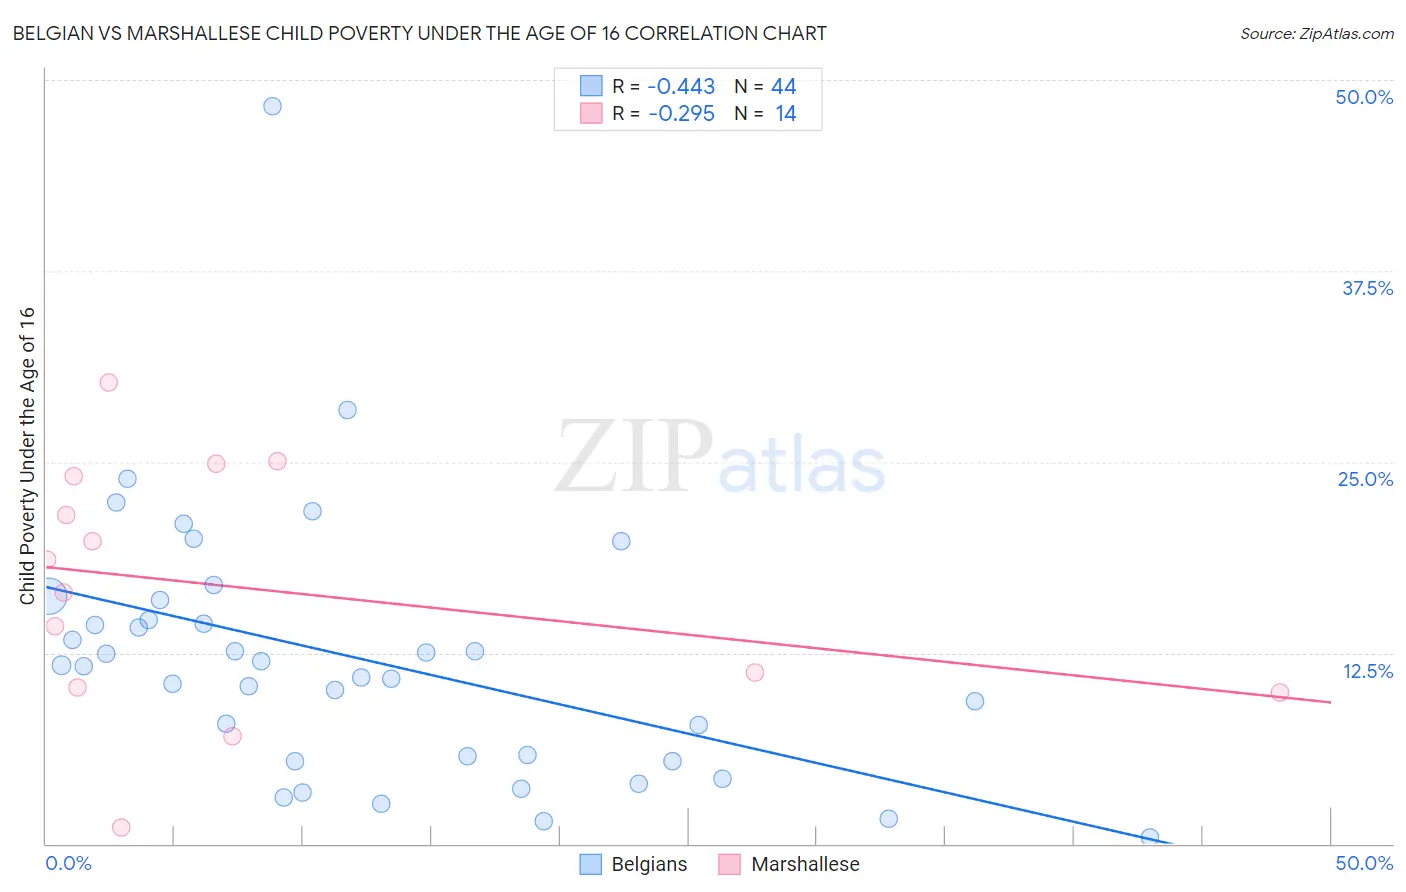 Belgian vs Marshallese Child Poverty Under the Age of 16